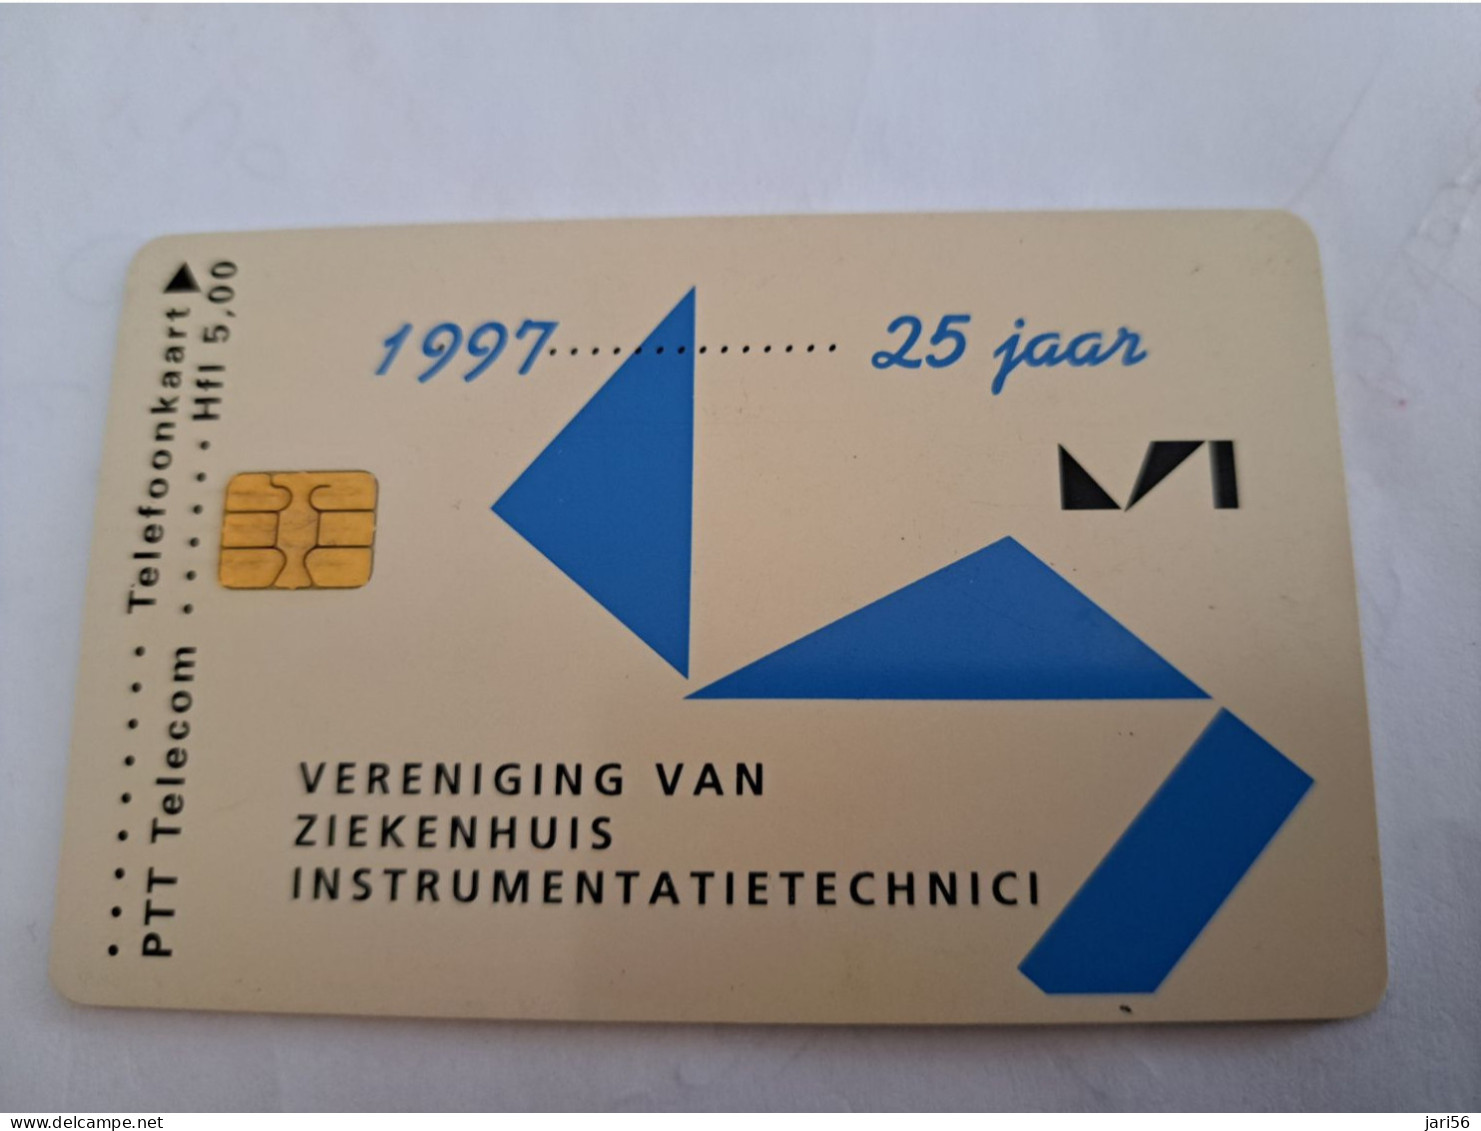 NETHERLANDS / CHIP ADVERTISING CARD/ HFL 5,00/HOSPITAL INSTRUMENTS   /  CRD 438    /MINT/   ** 14140** - Private